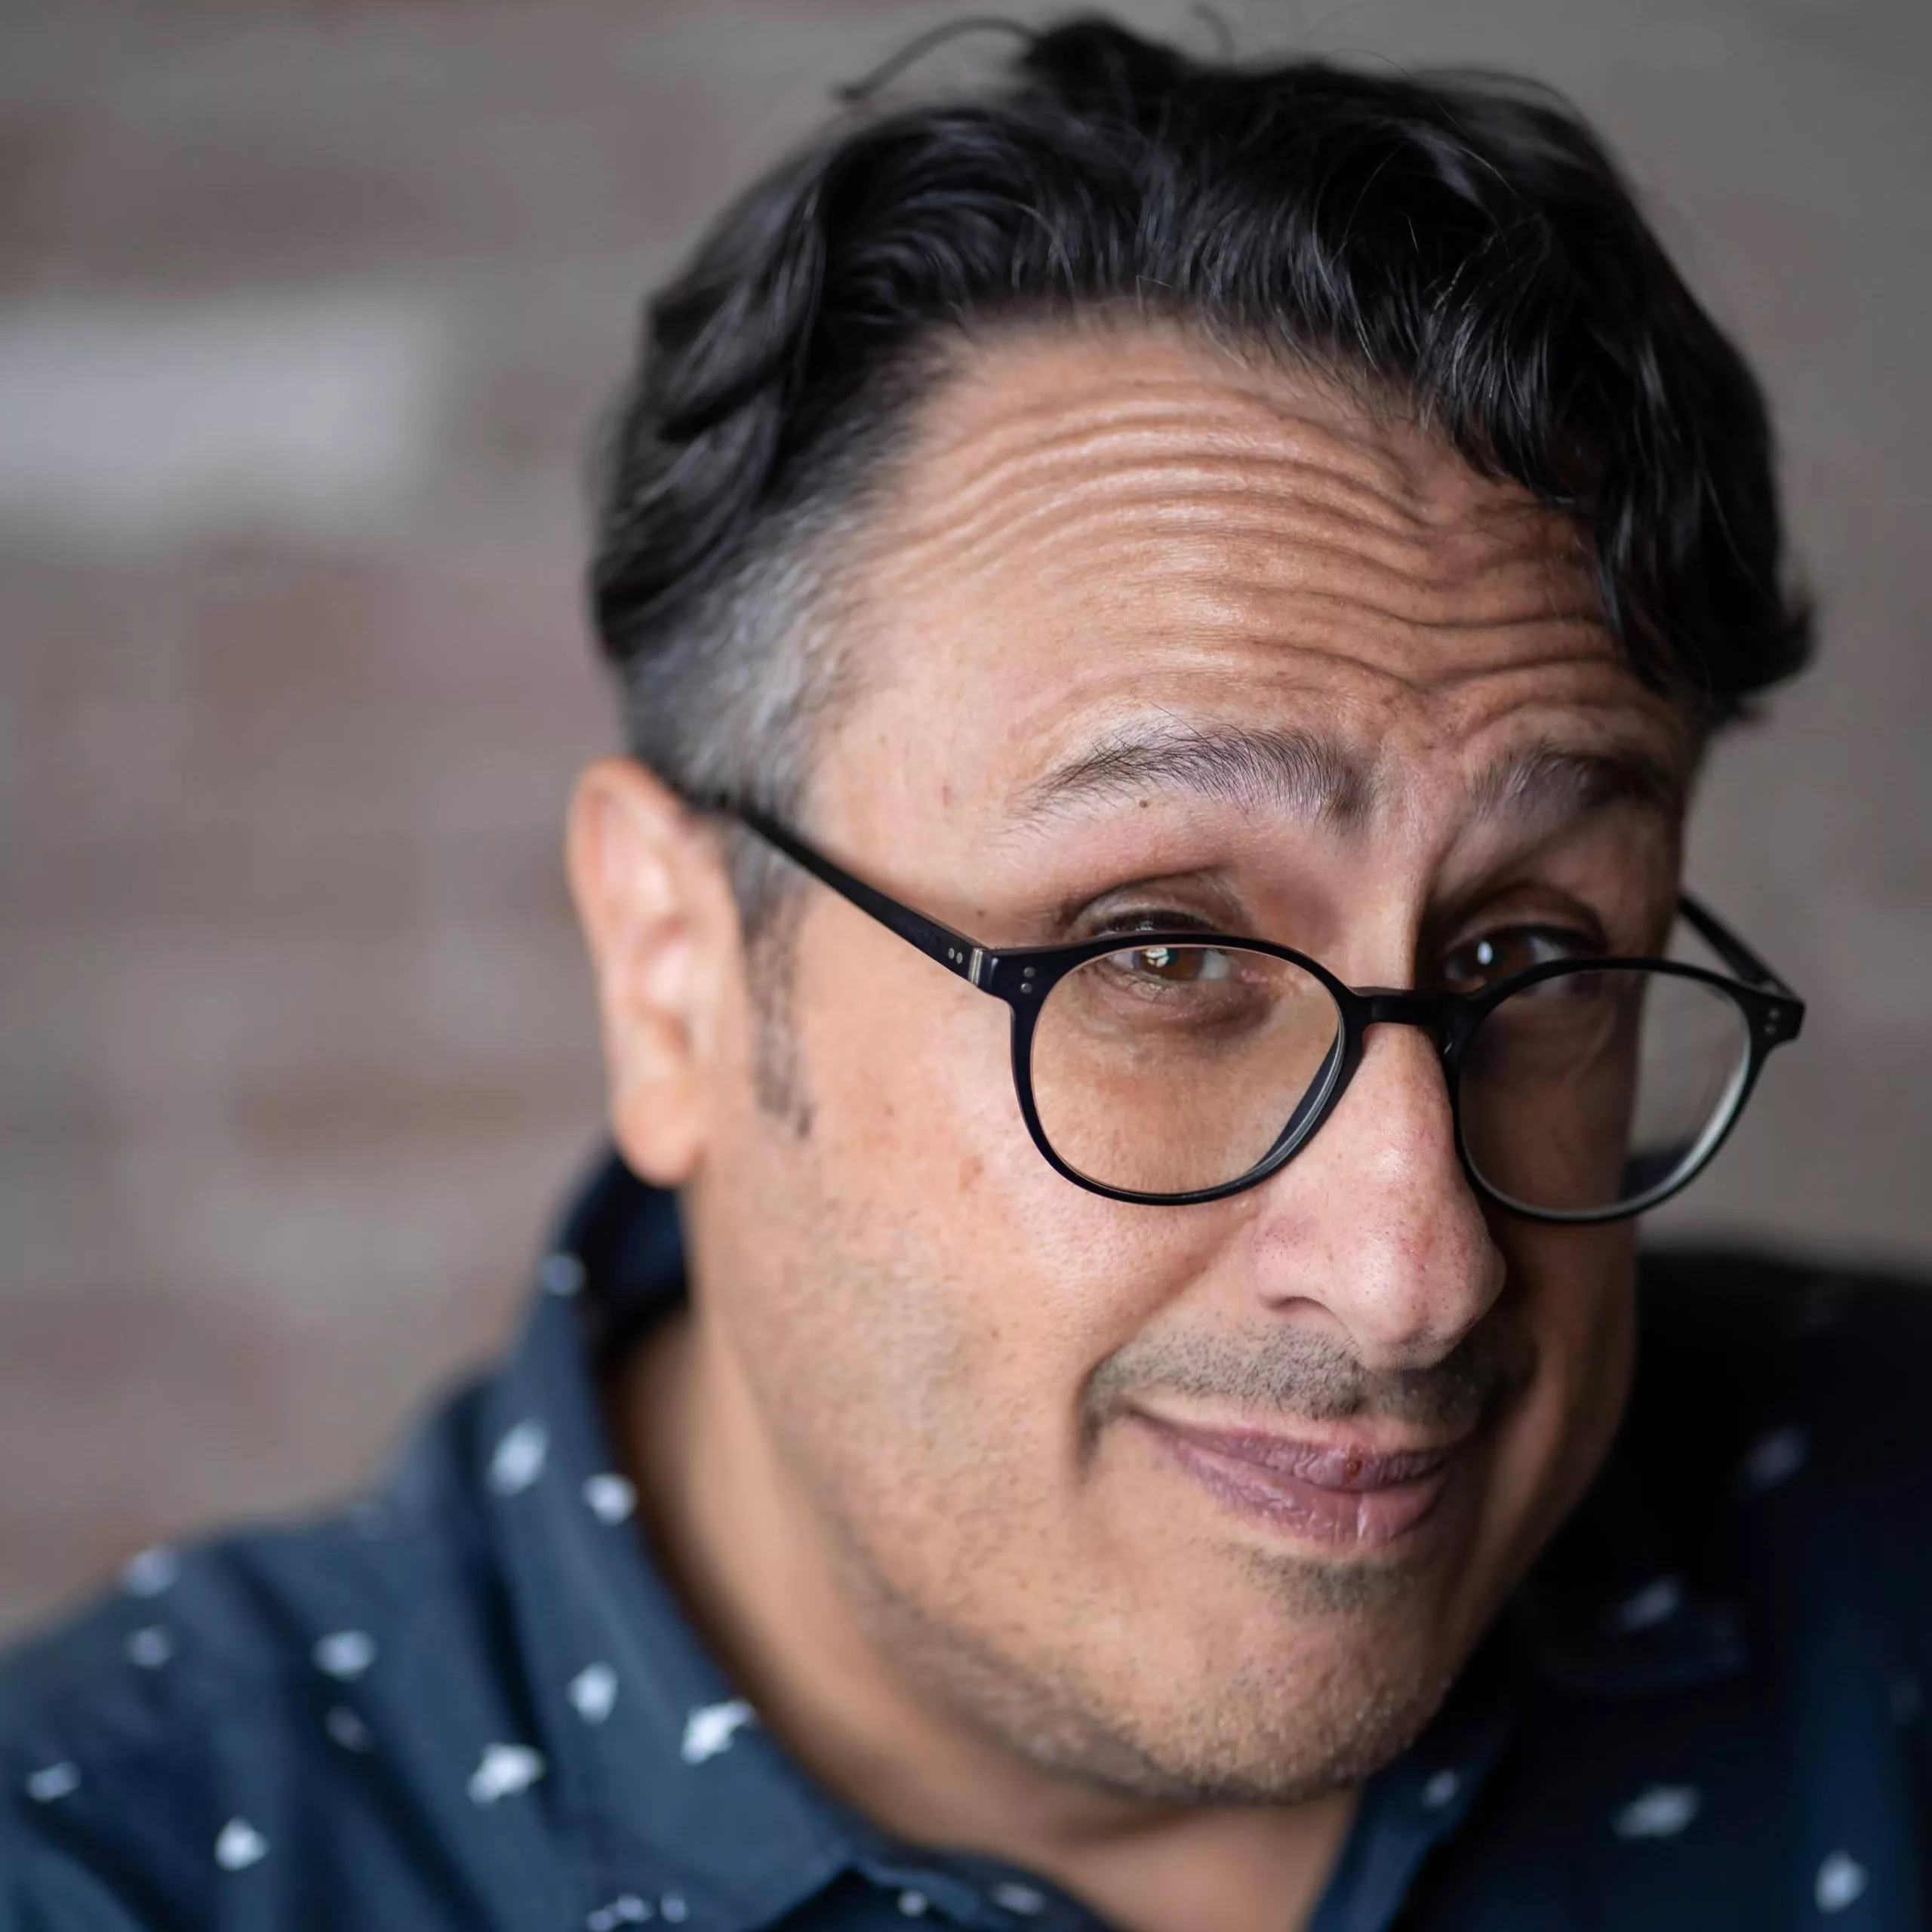 Maz Hasan is a performer at the Neighborhood Comedy theatre in downtown Mesa